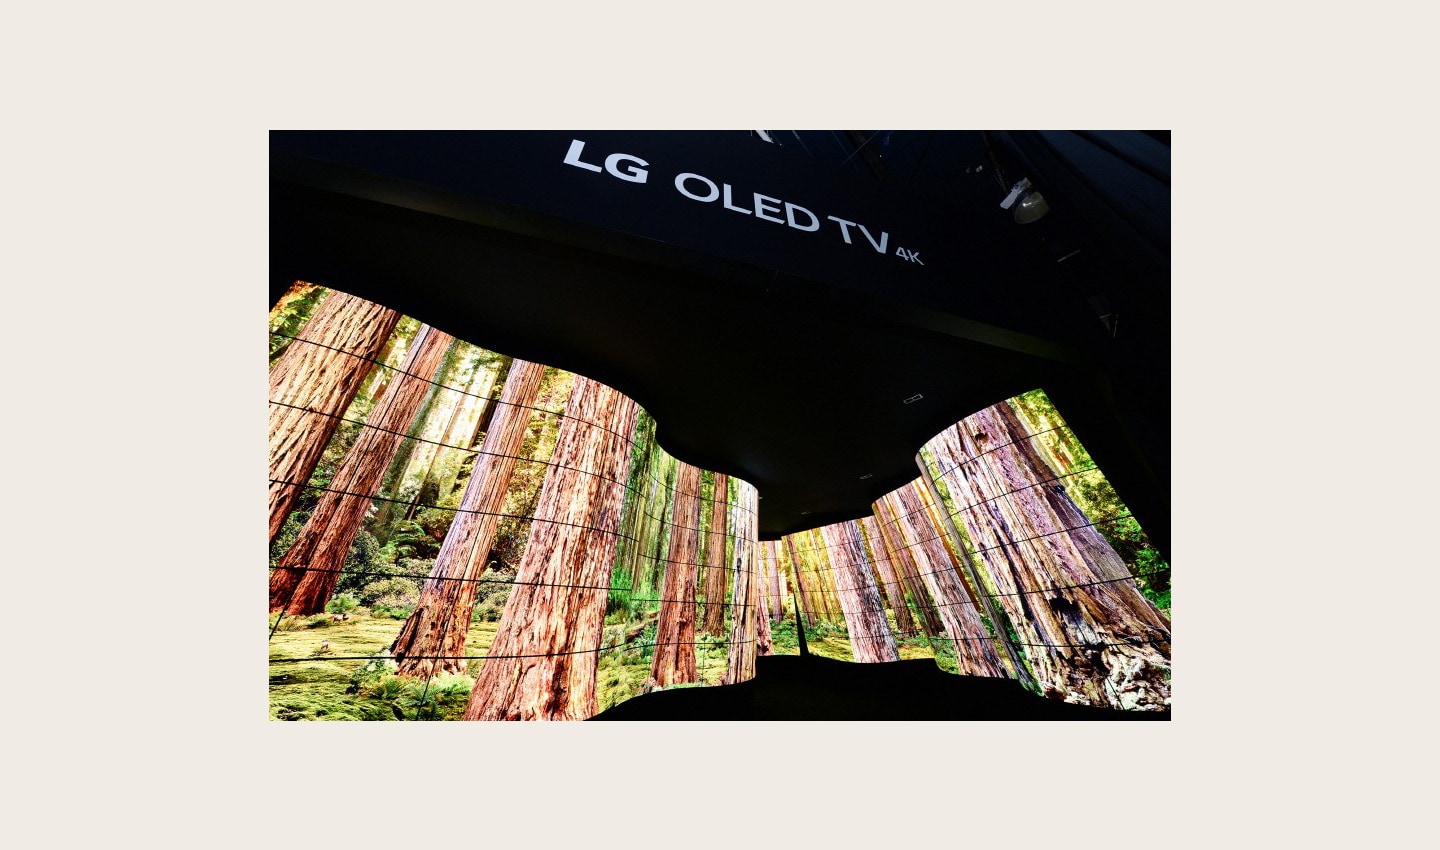 Entrance view of the LG OLED Canyon, with footage of giant redwood trees displayed across the OLED panels